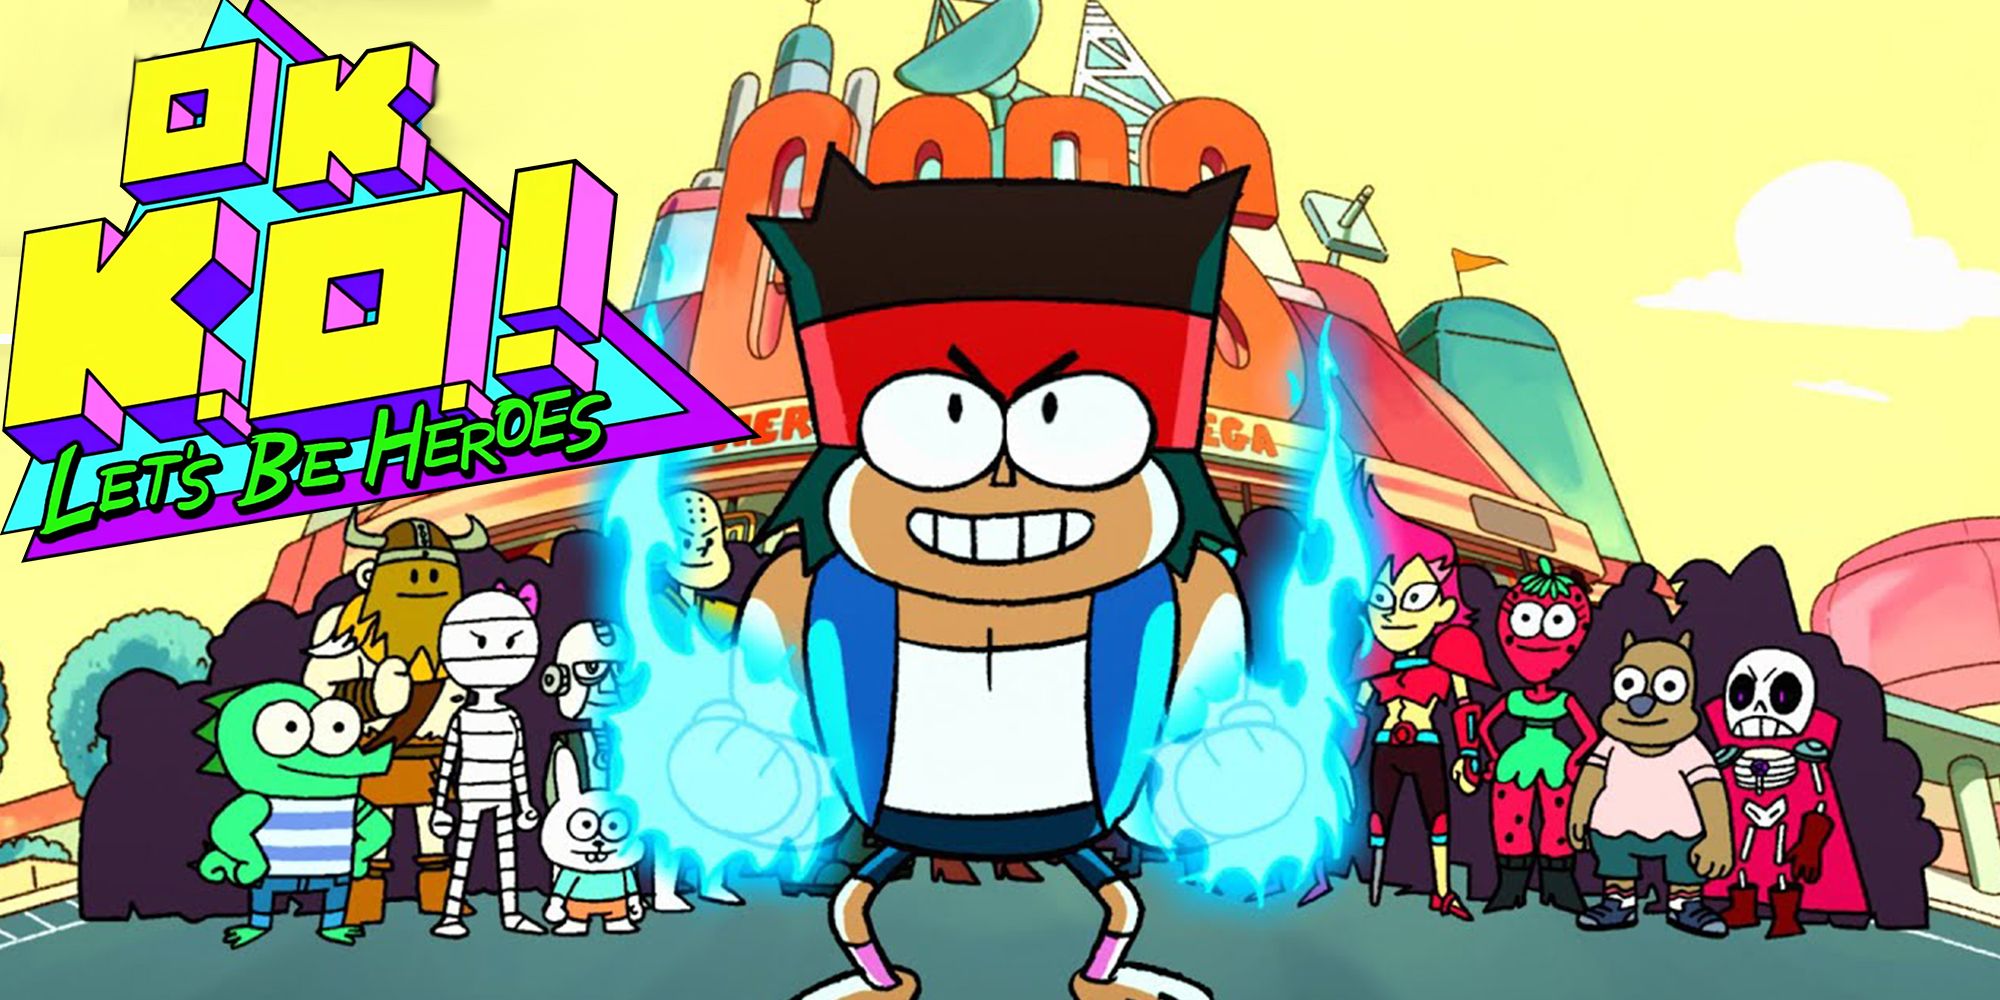 K.O. standing in front of cast